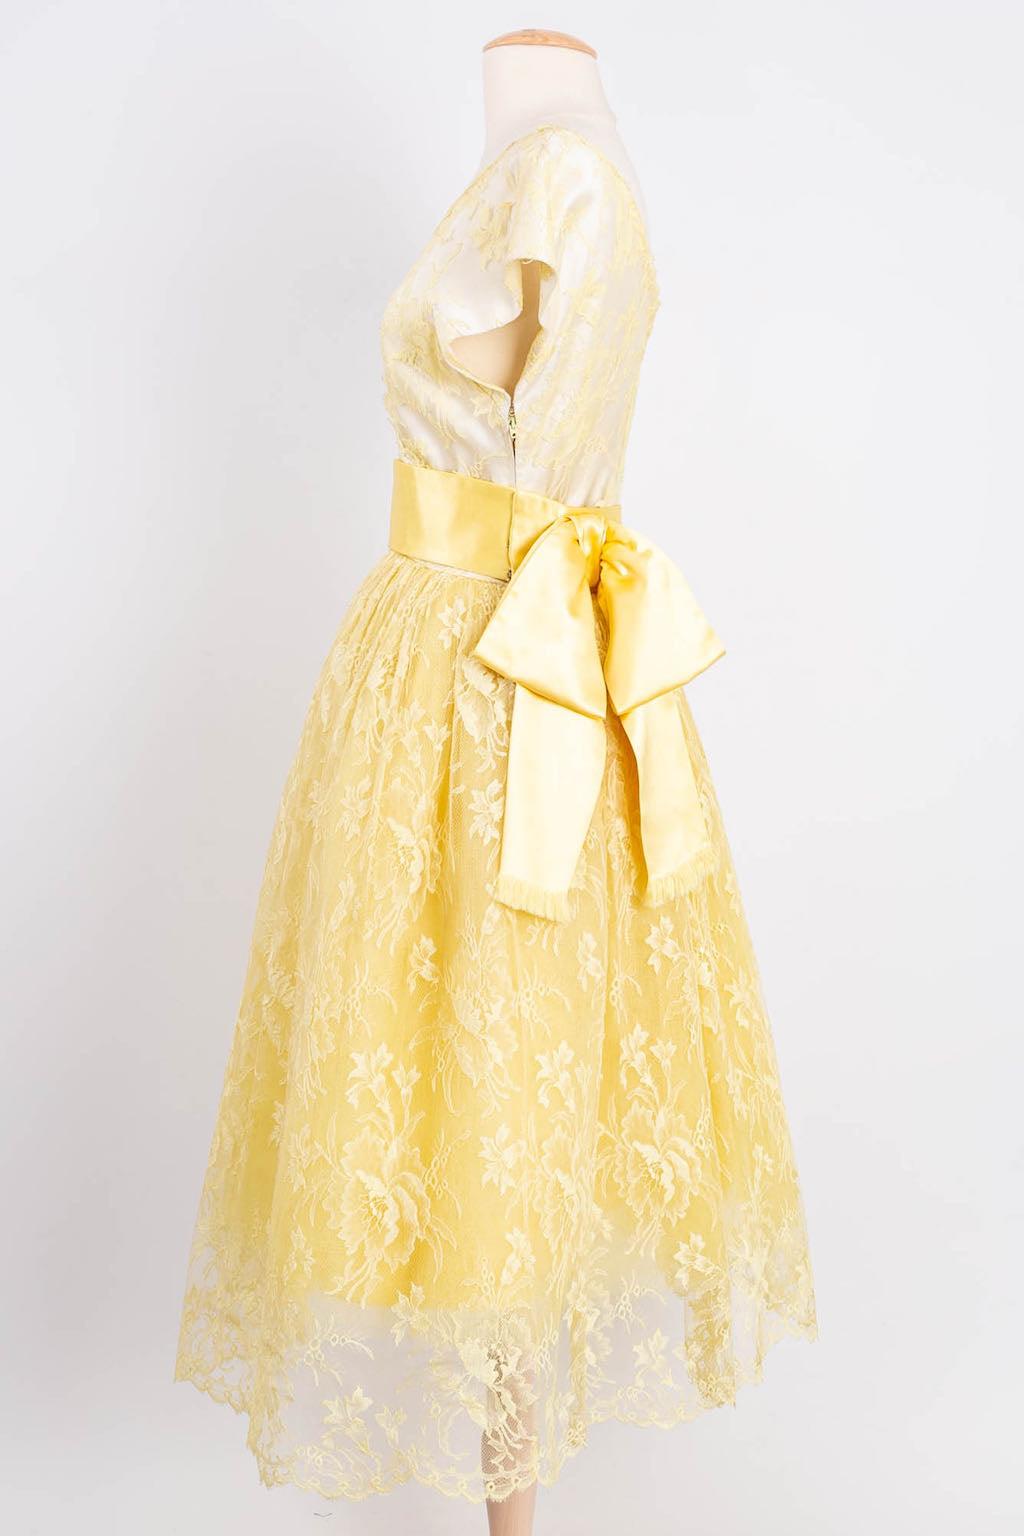 Jeanne Lanvin By Castillo - Yellow lace dress with a yellow silk belt. Circa 1950s. No composition or size tag, it fits a size 36FR.

Additional information: 
Dimensions: Shoulders: 40 cm (15.74